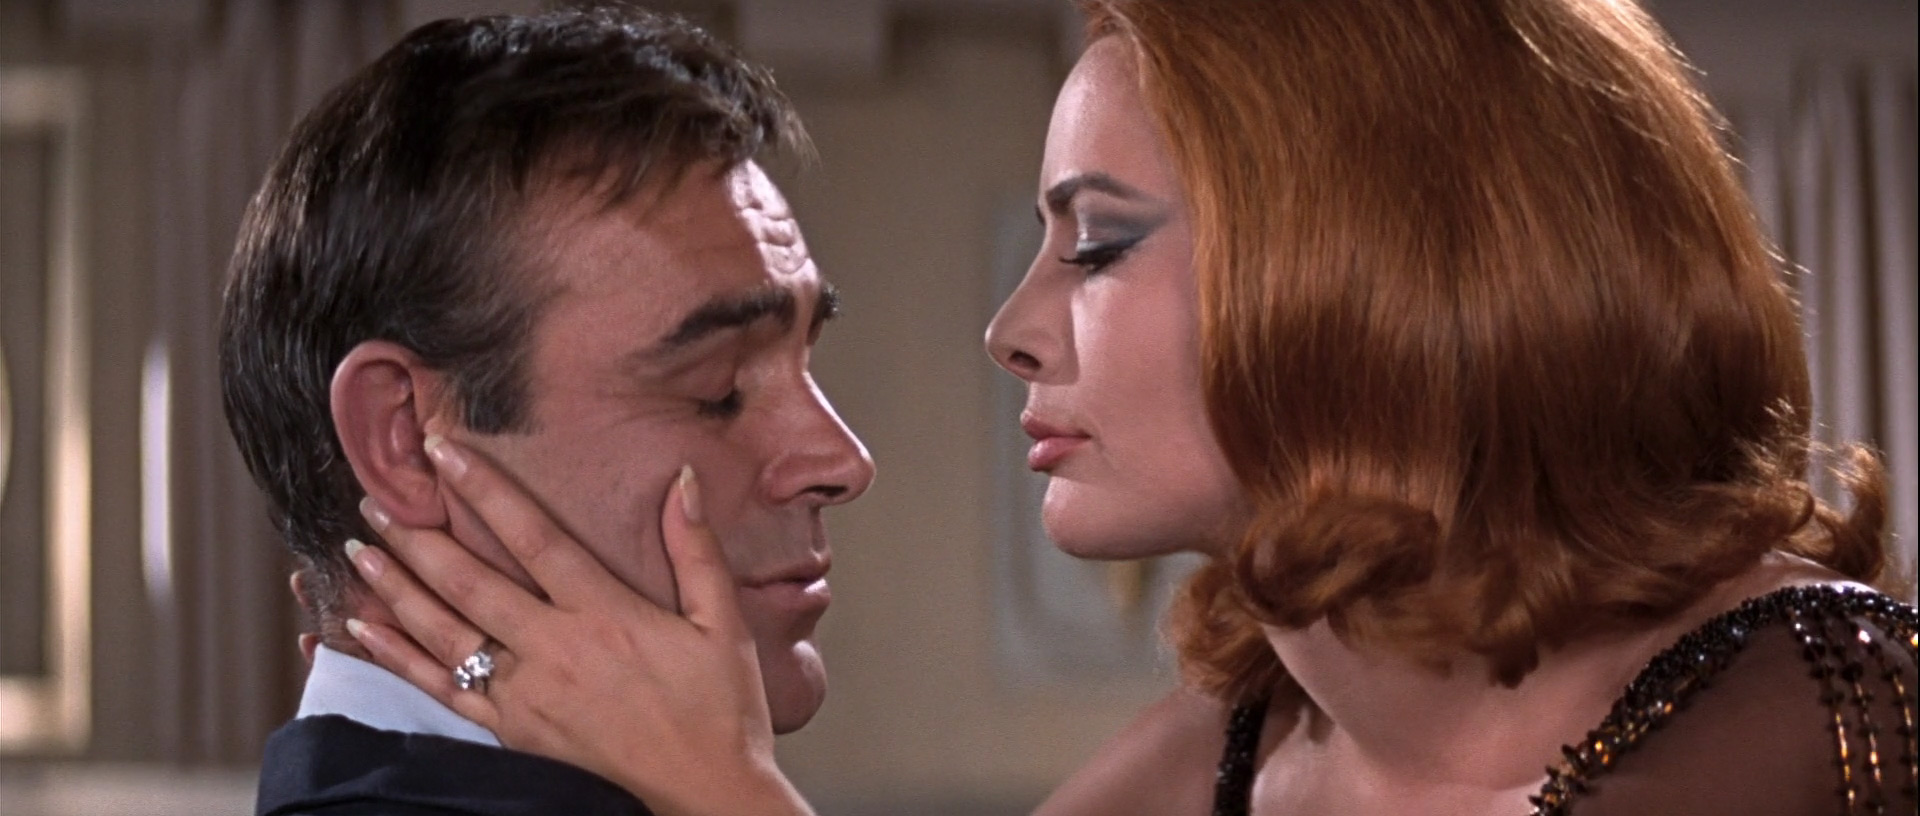 Helga Brandt, Karin Dor, 007: with girl, 007: kissing, kiss in You Only Live Twice